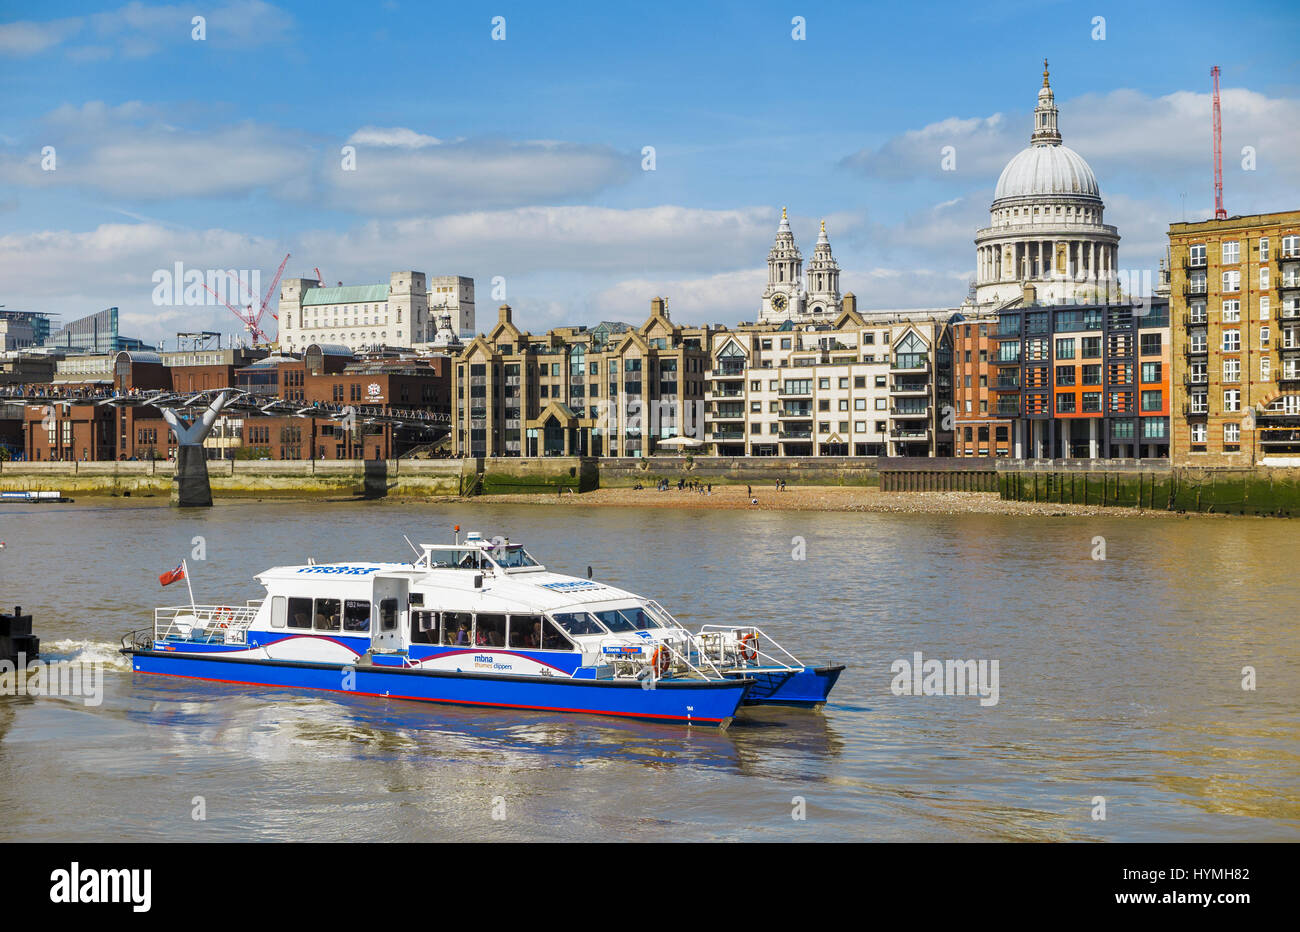 Blue and white Catamaran Thames Clipper boat, part of the river bus service, Bankside Pier, St Paul's Cathedral in the background, on a fine sunny day Stock Photo